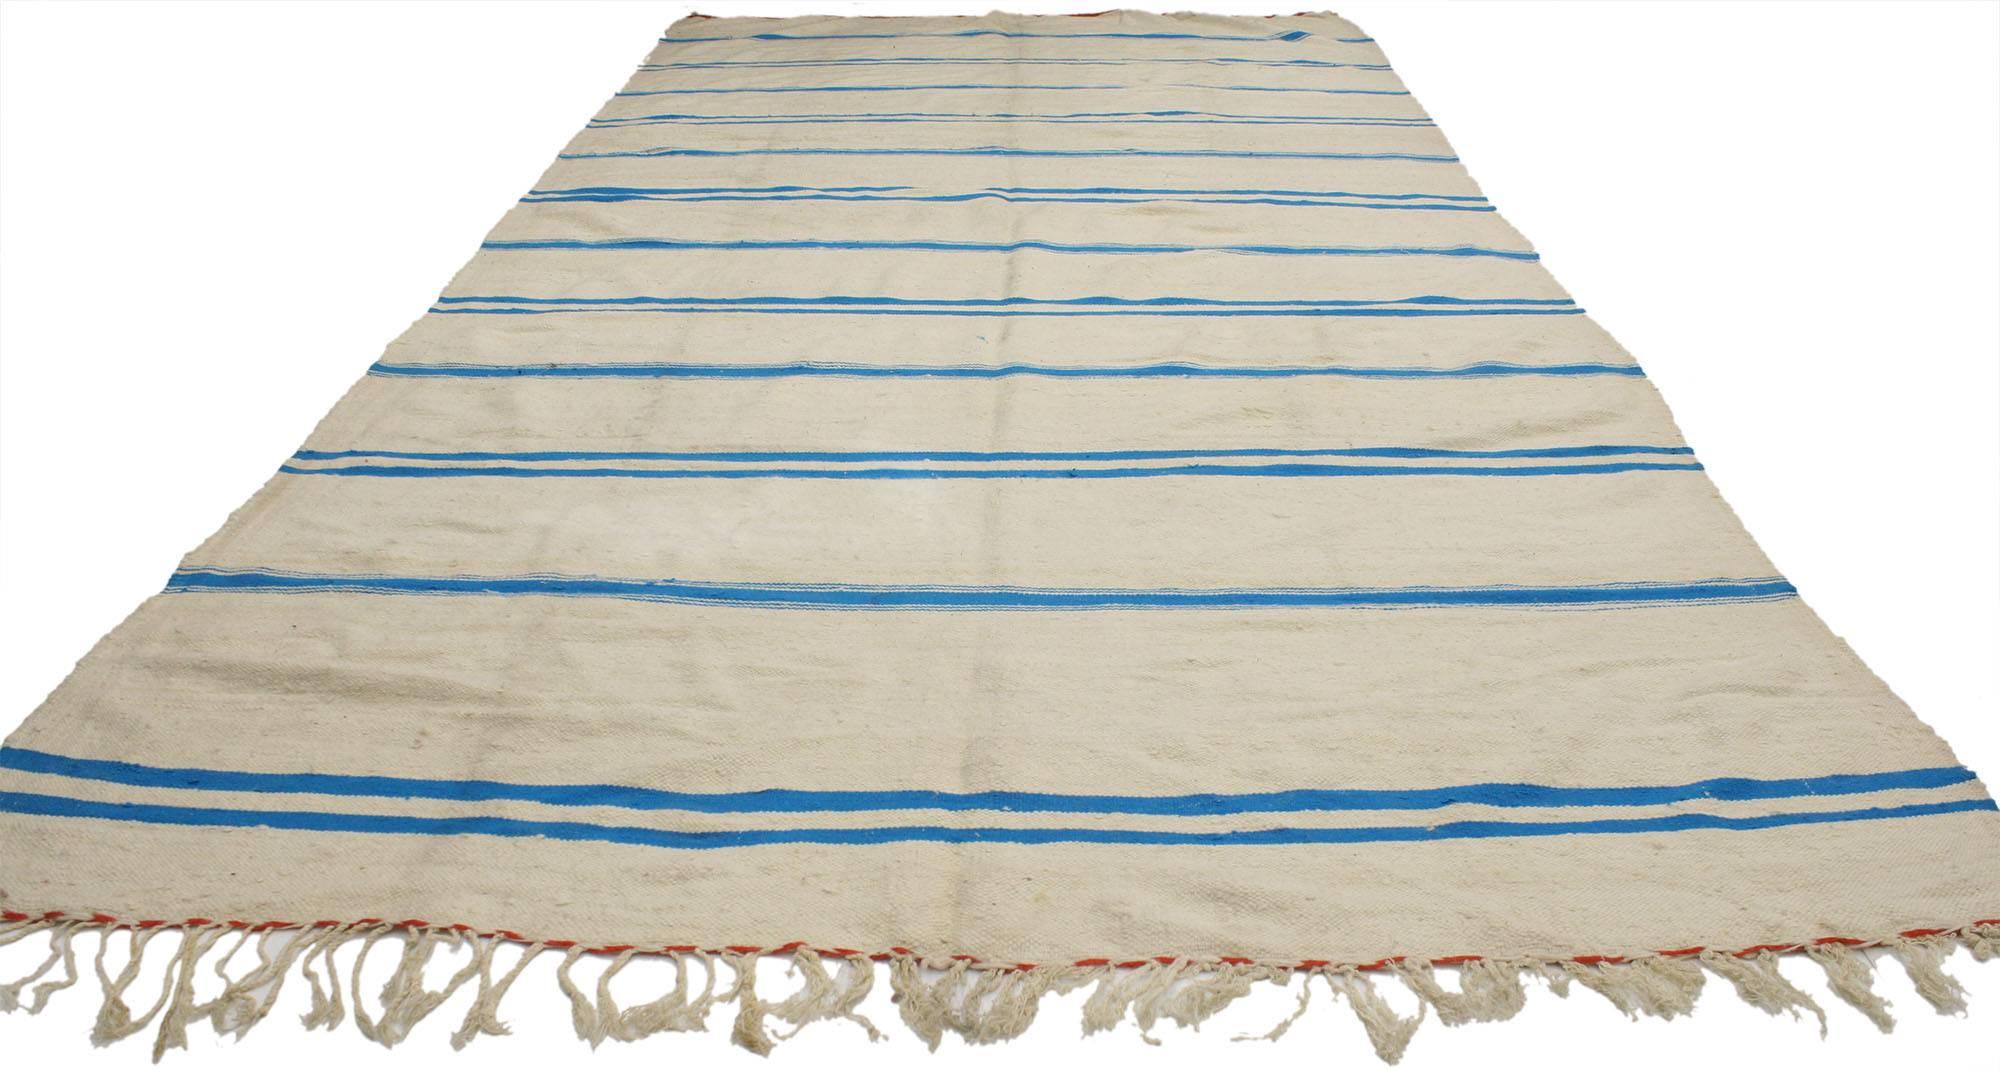 Hand-Woven Vintage Berber Moroccan Striped Kilim Rug with Relaxed Coastal Style